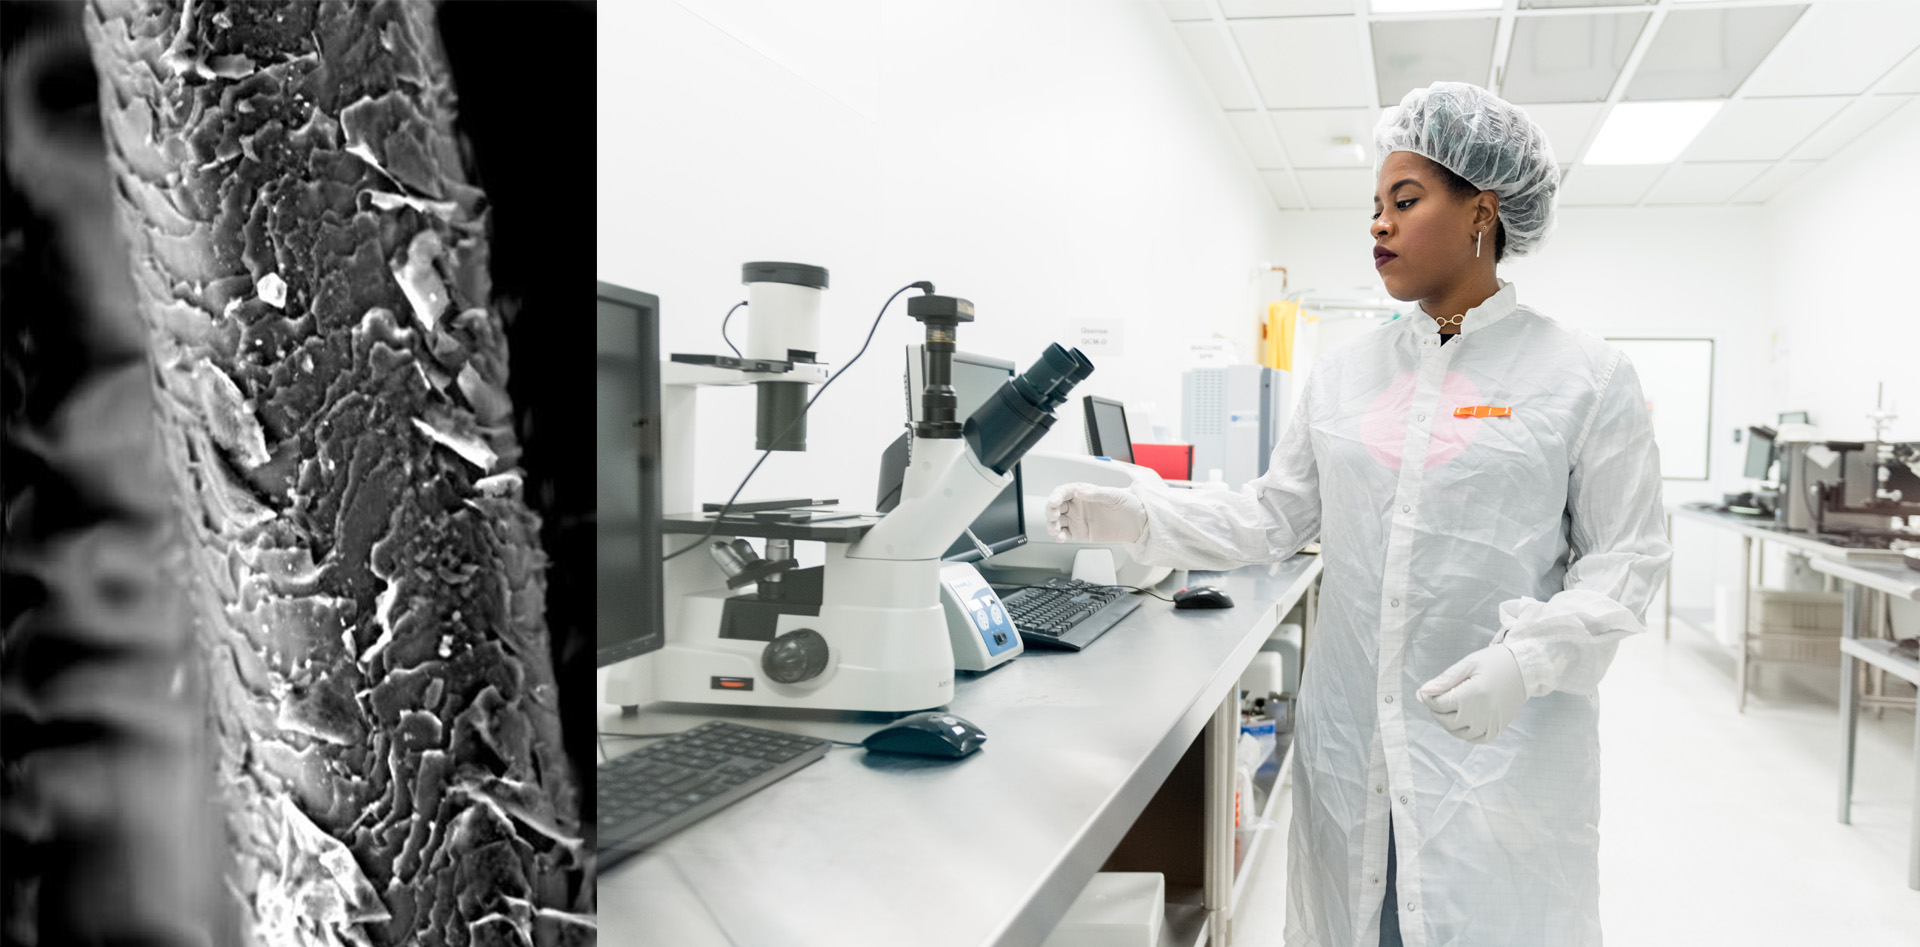 Two photos, one of a microscopic detail of a hair strand, and one of a Myavana employee in a clean room, dressed in protective clothing, approaching a microscope